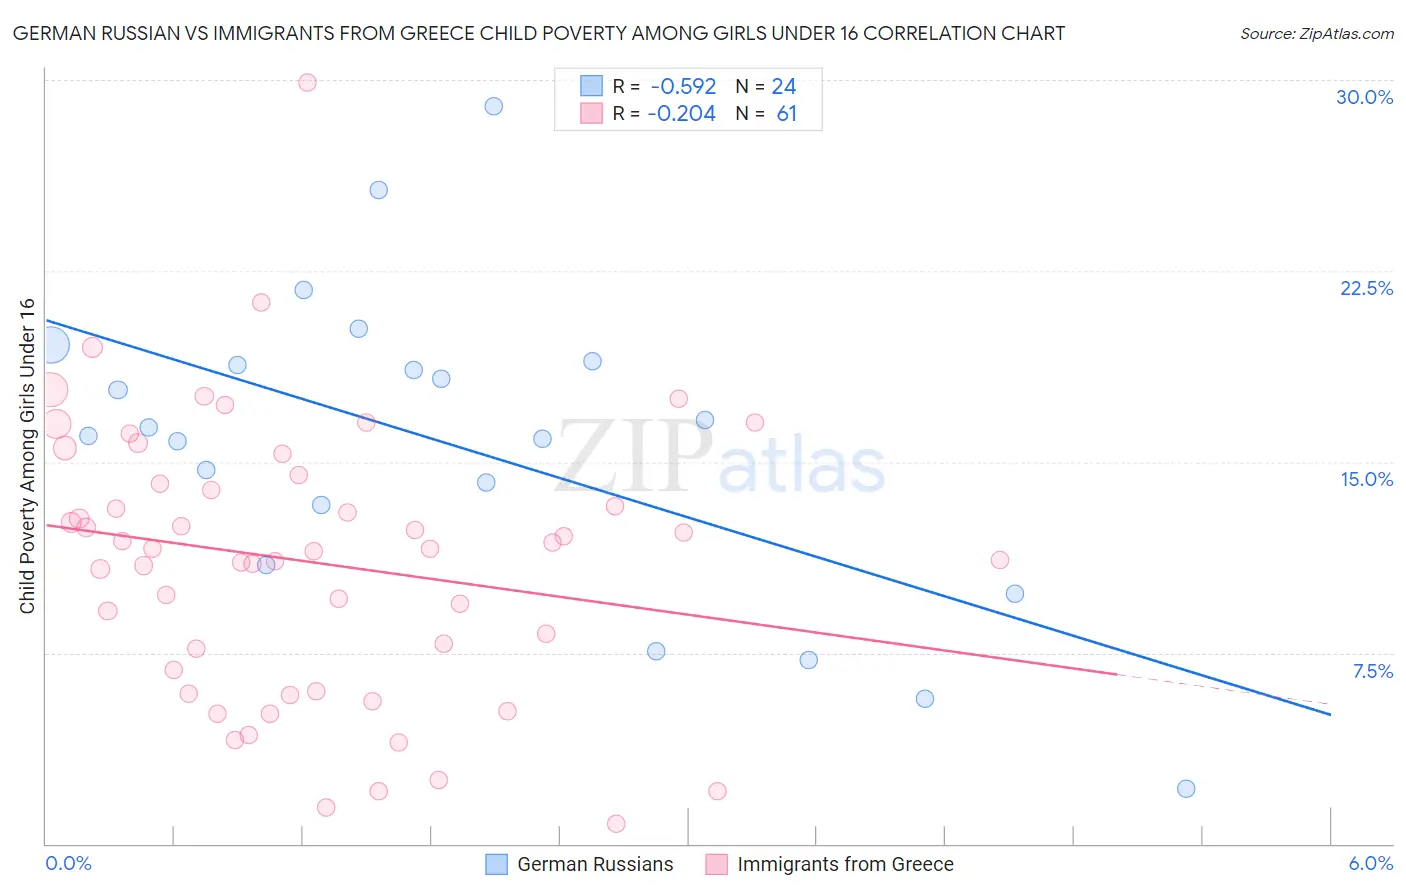 German Russian vs Immigrants from Greece Child Poverty Among Girls Under 16